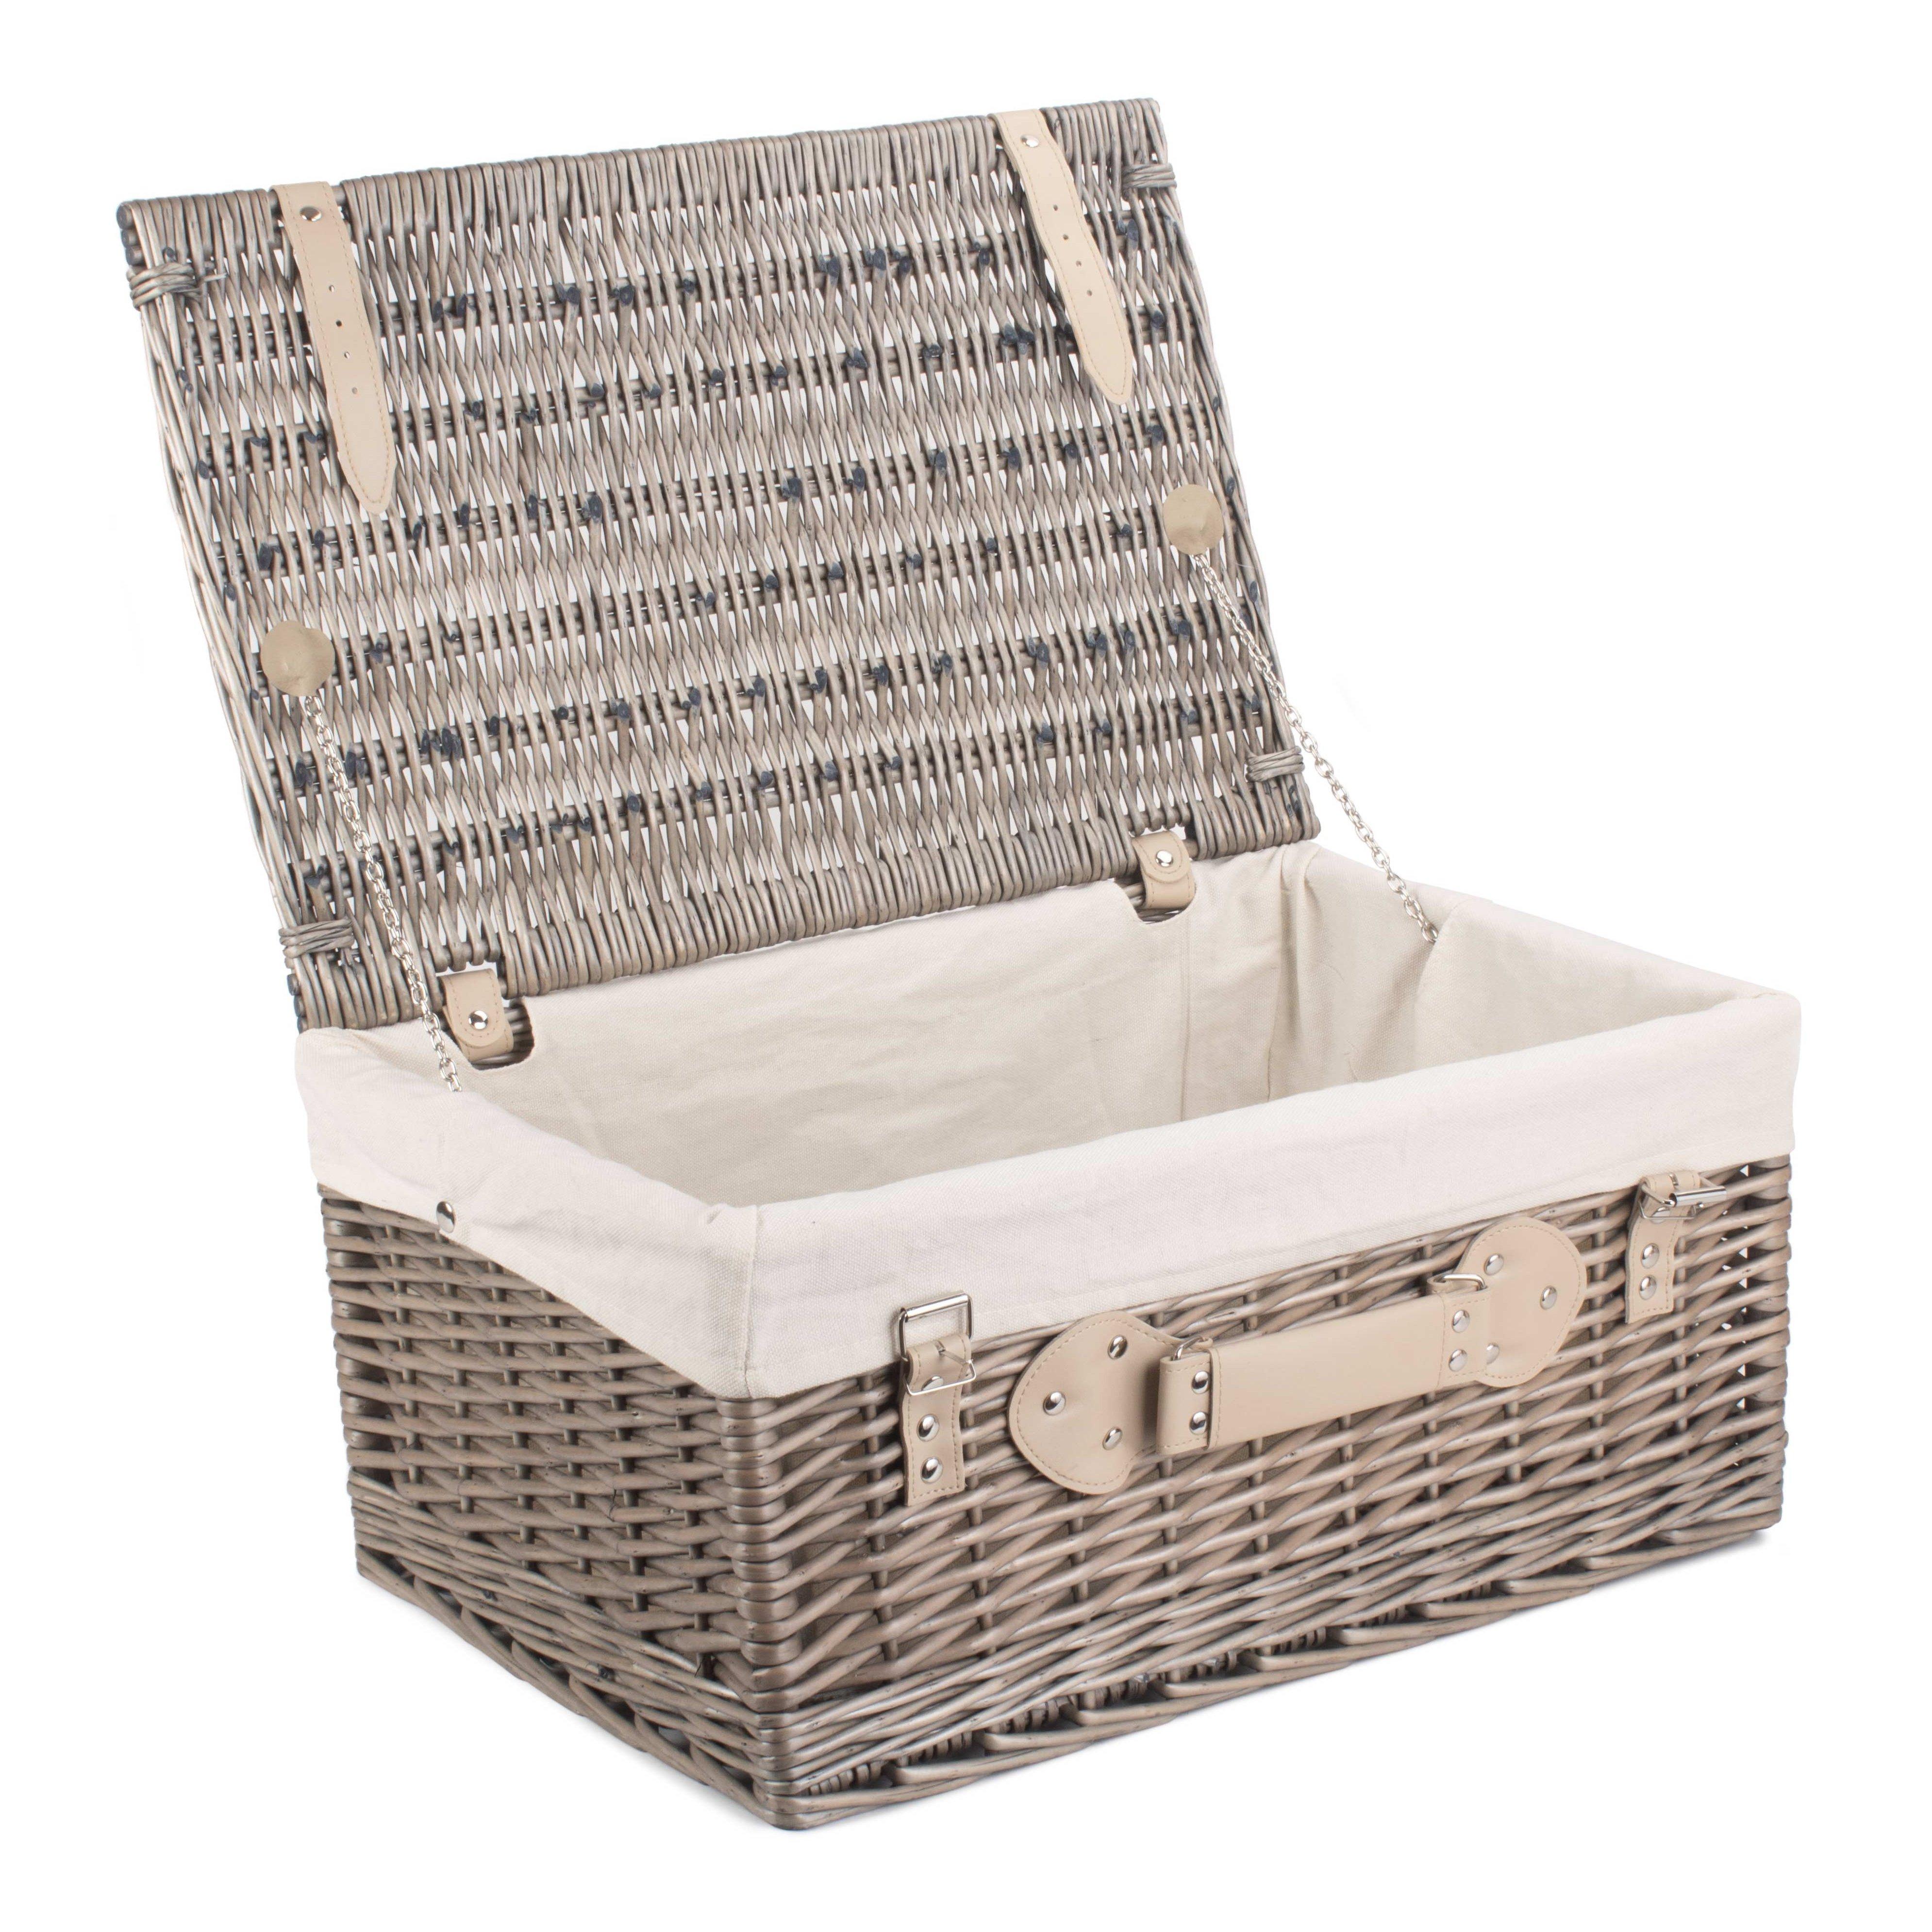 Wicker 51cm Antique Wash Picnic Basket with Cotton Lining